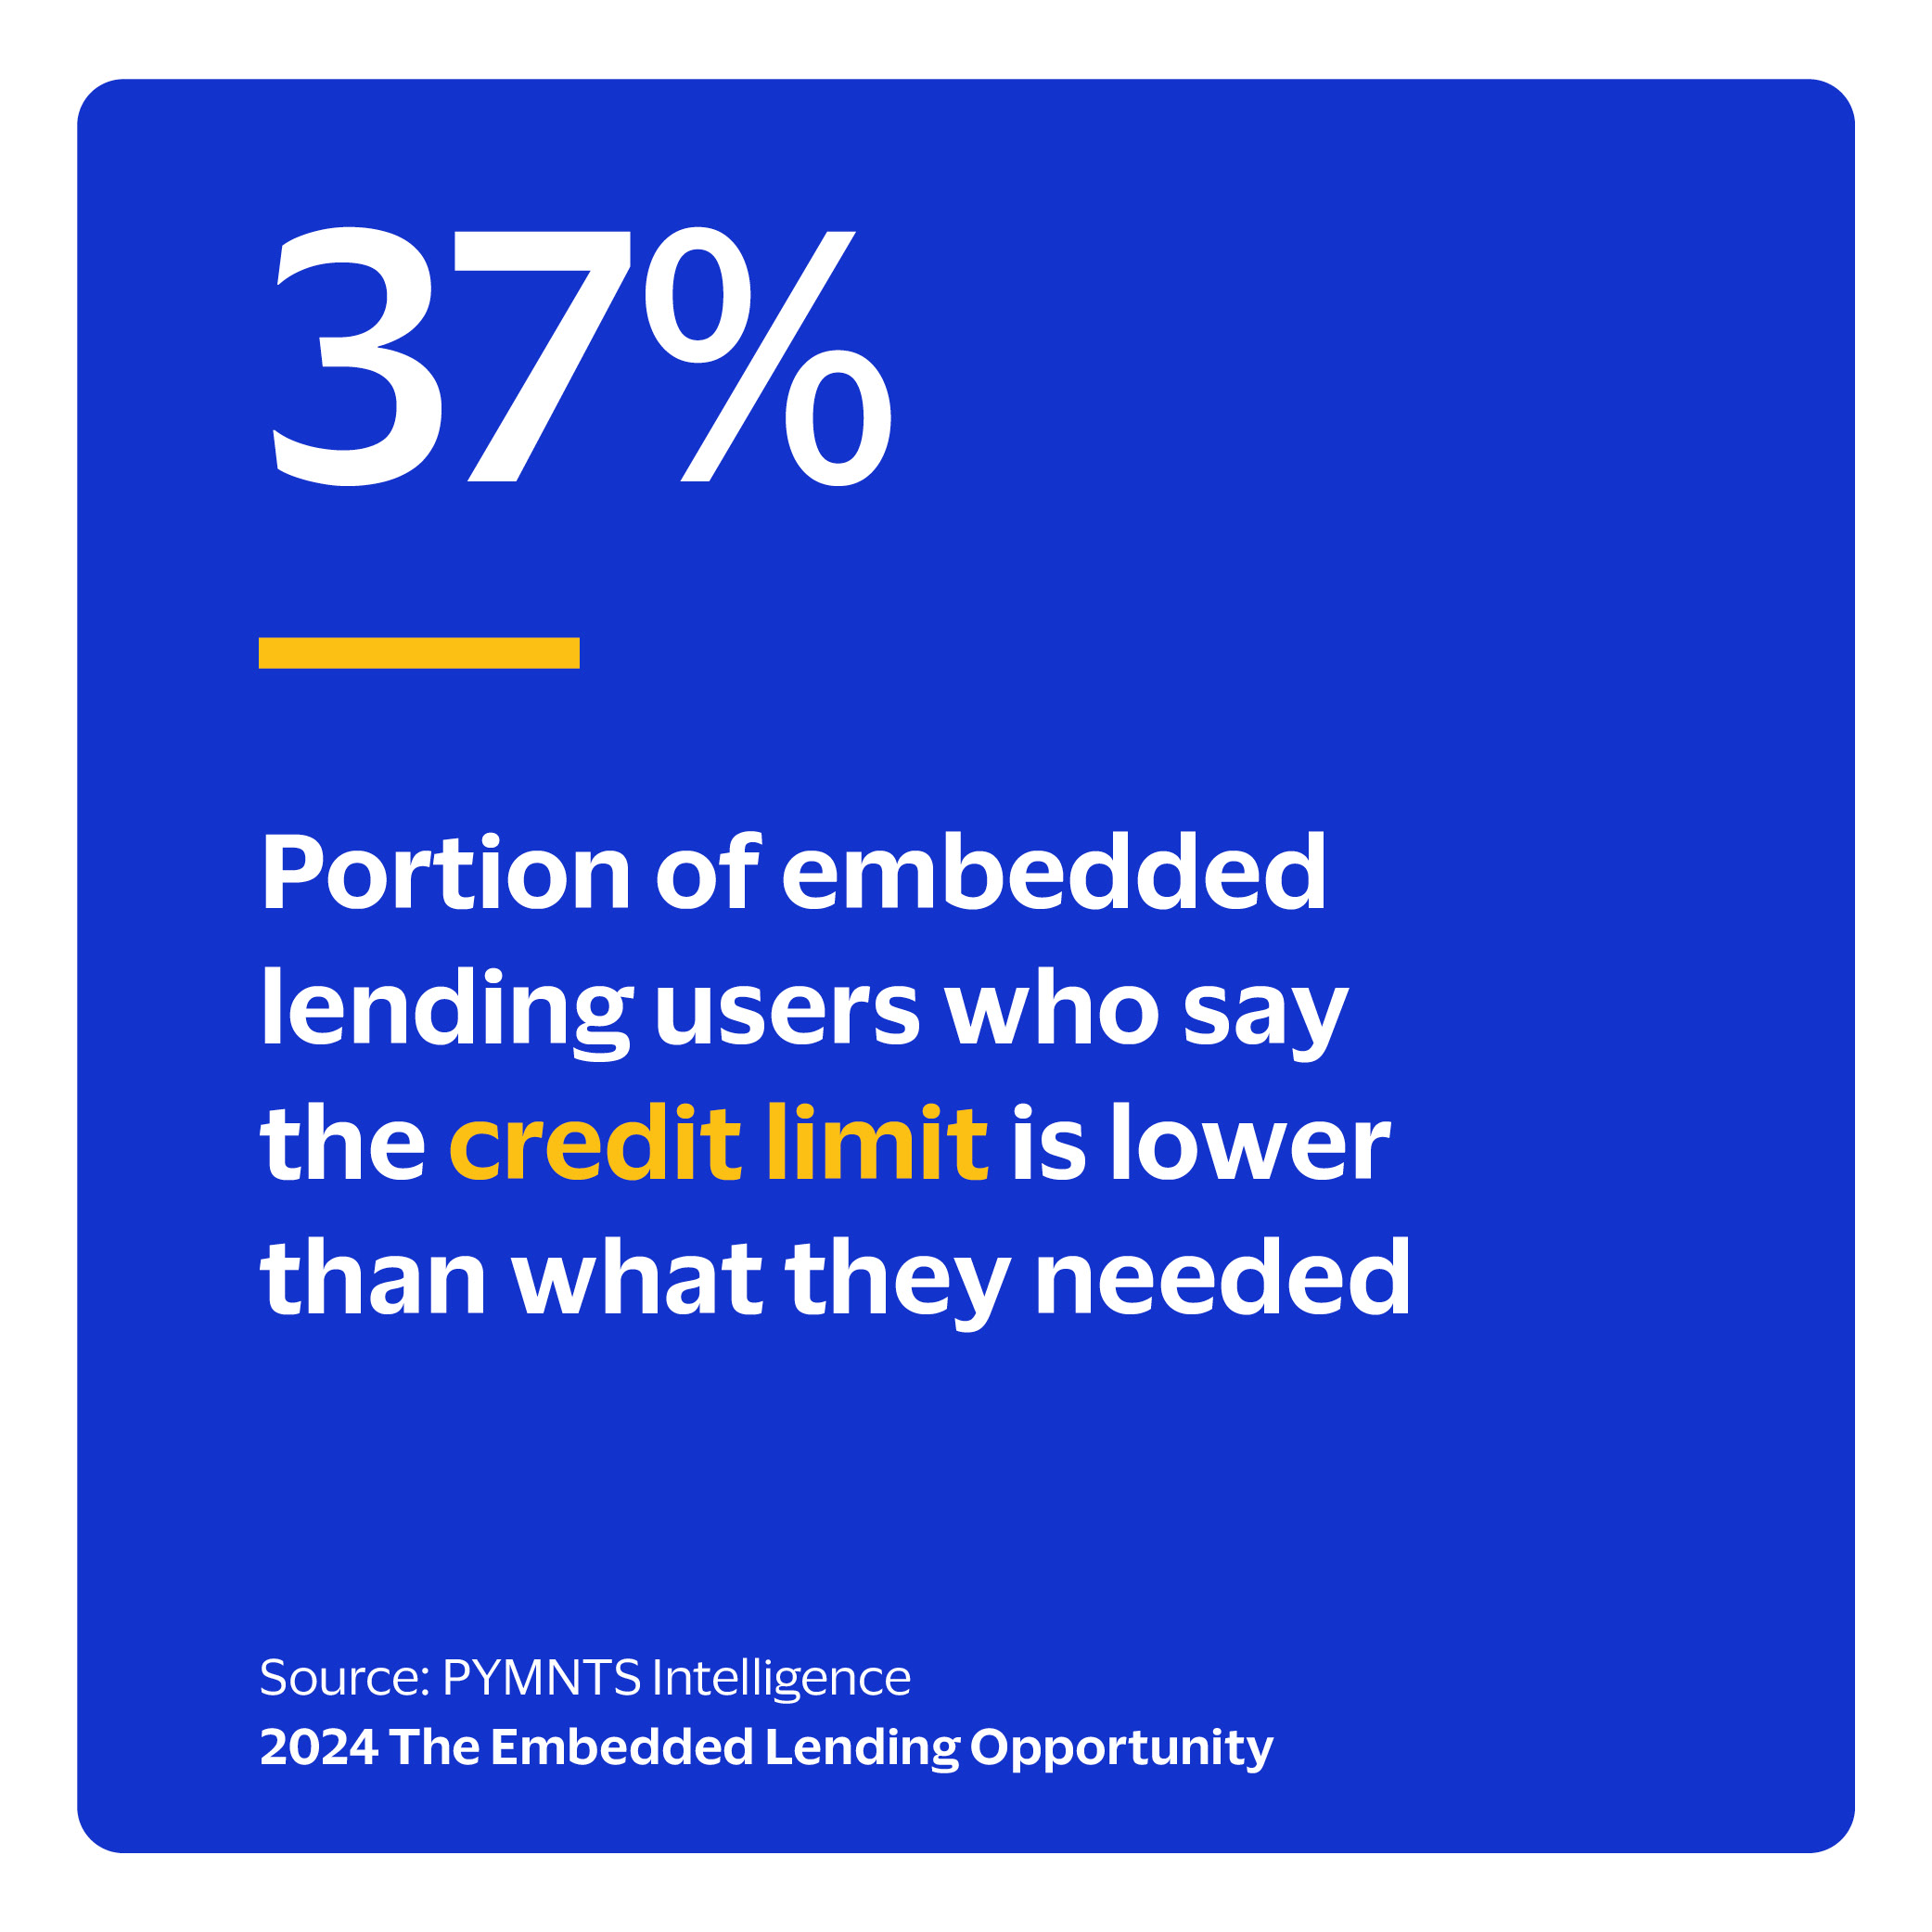 37%: Portion of embedded lending users who say the credit limit is lower than what they needed